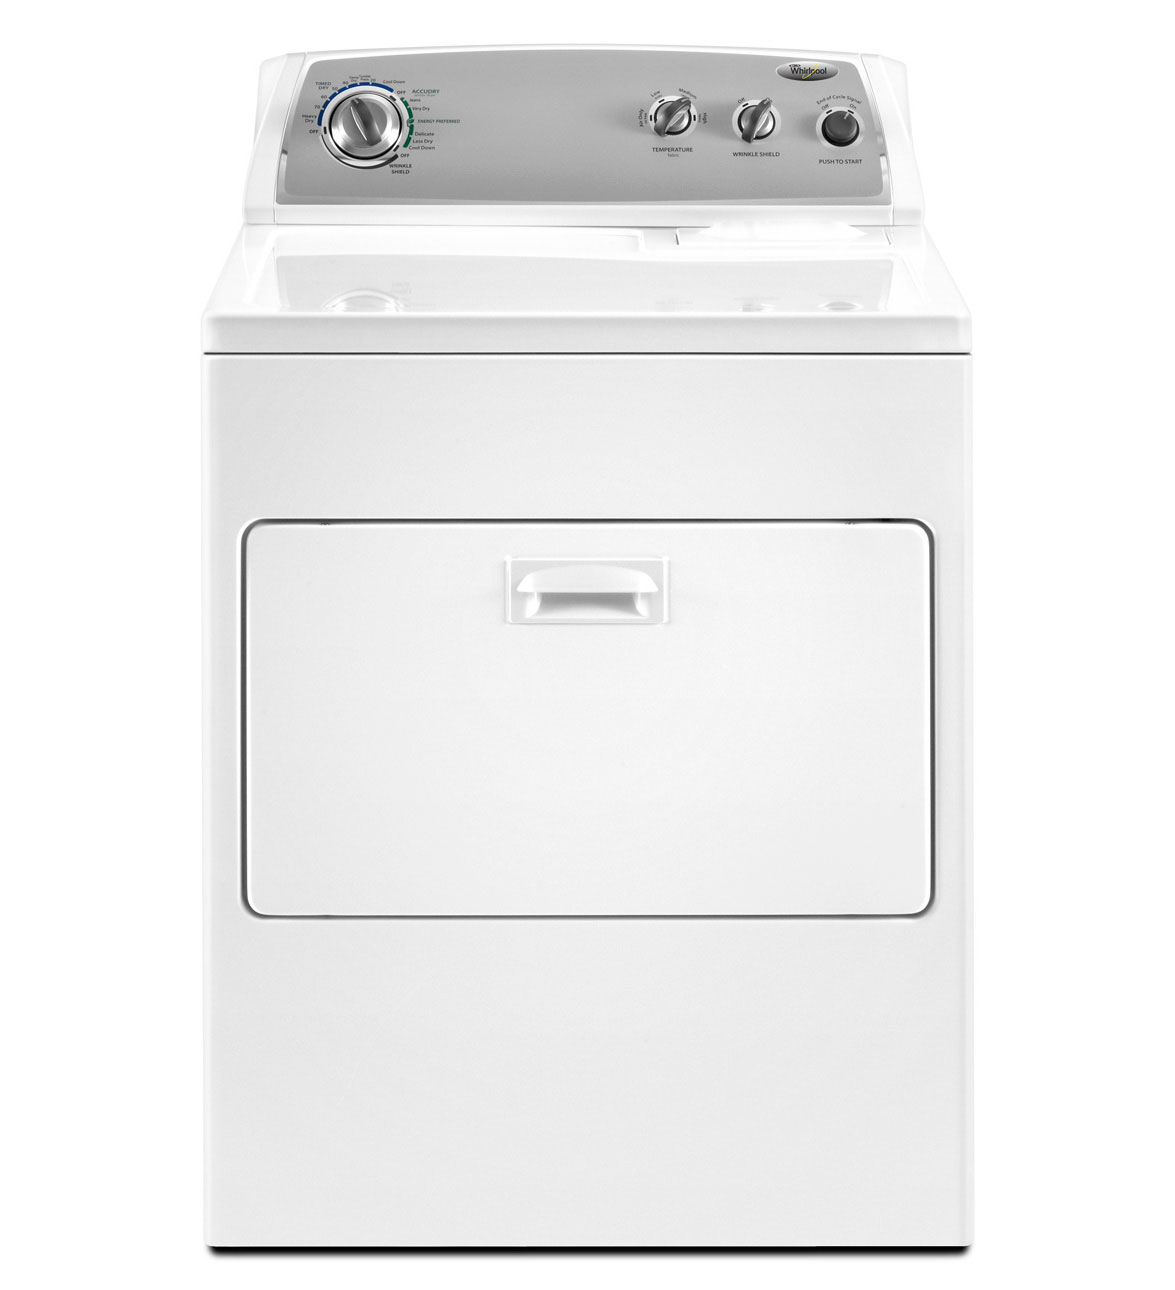 review-of-whirlpool-traditional-electric-dryer-with-accudry-drying